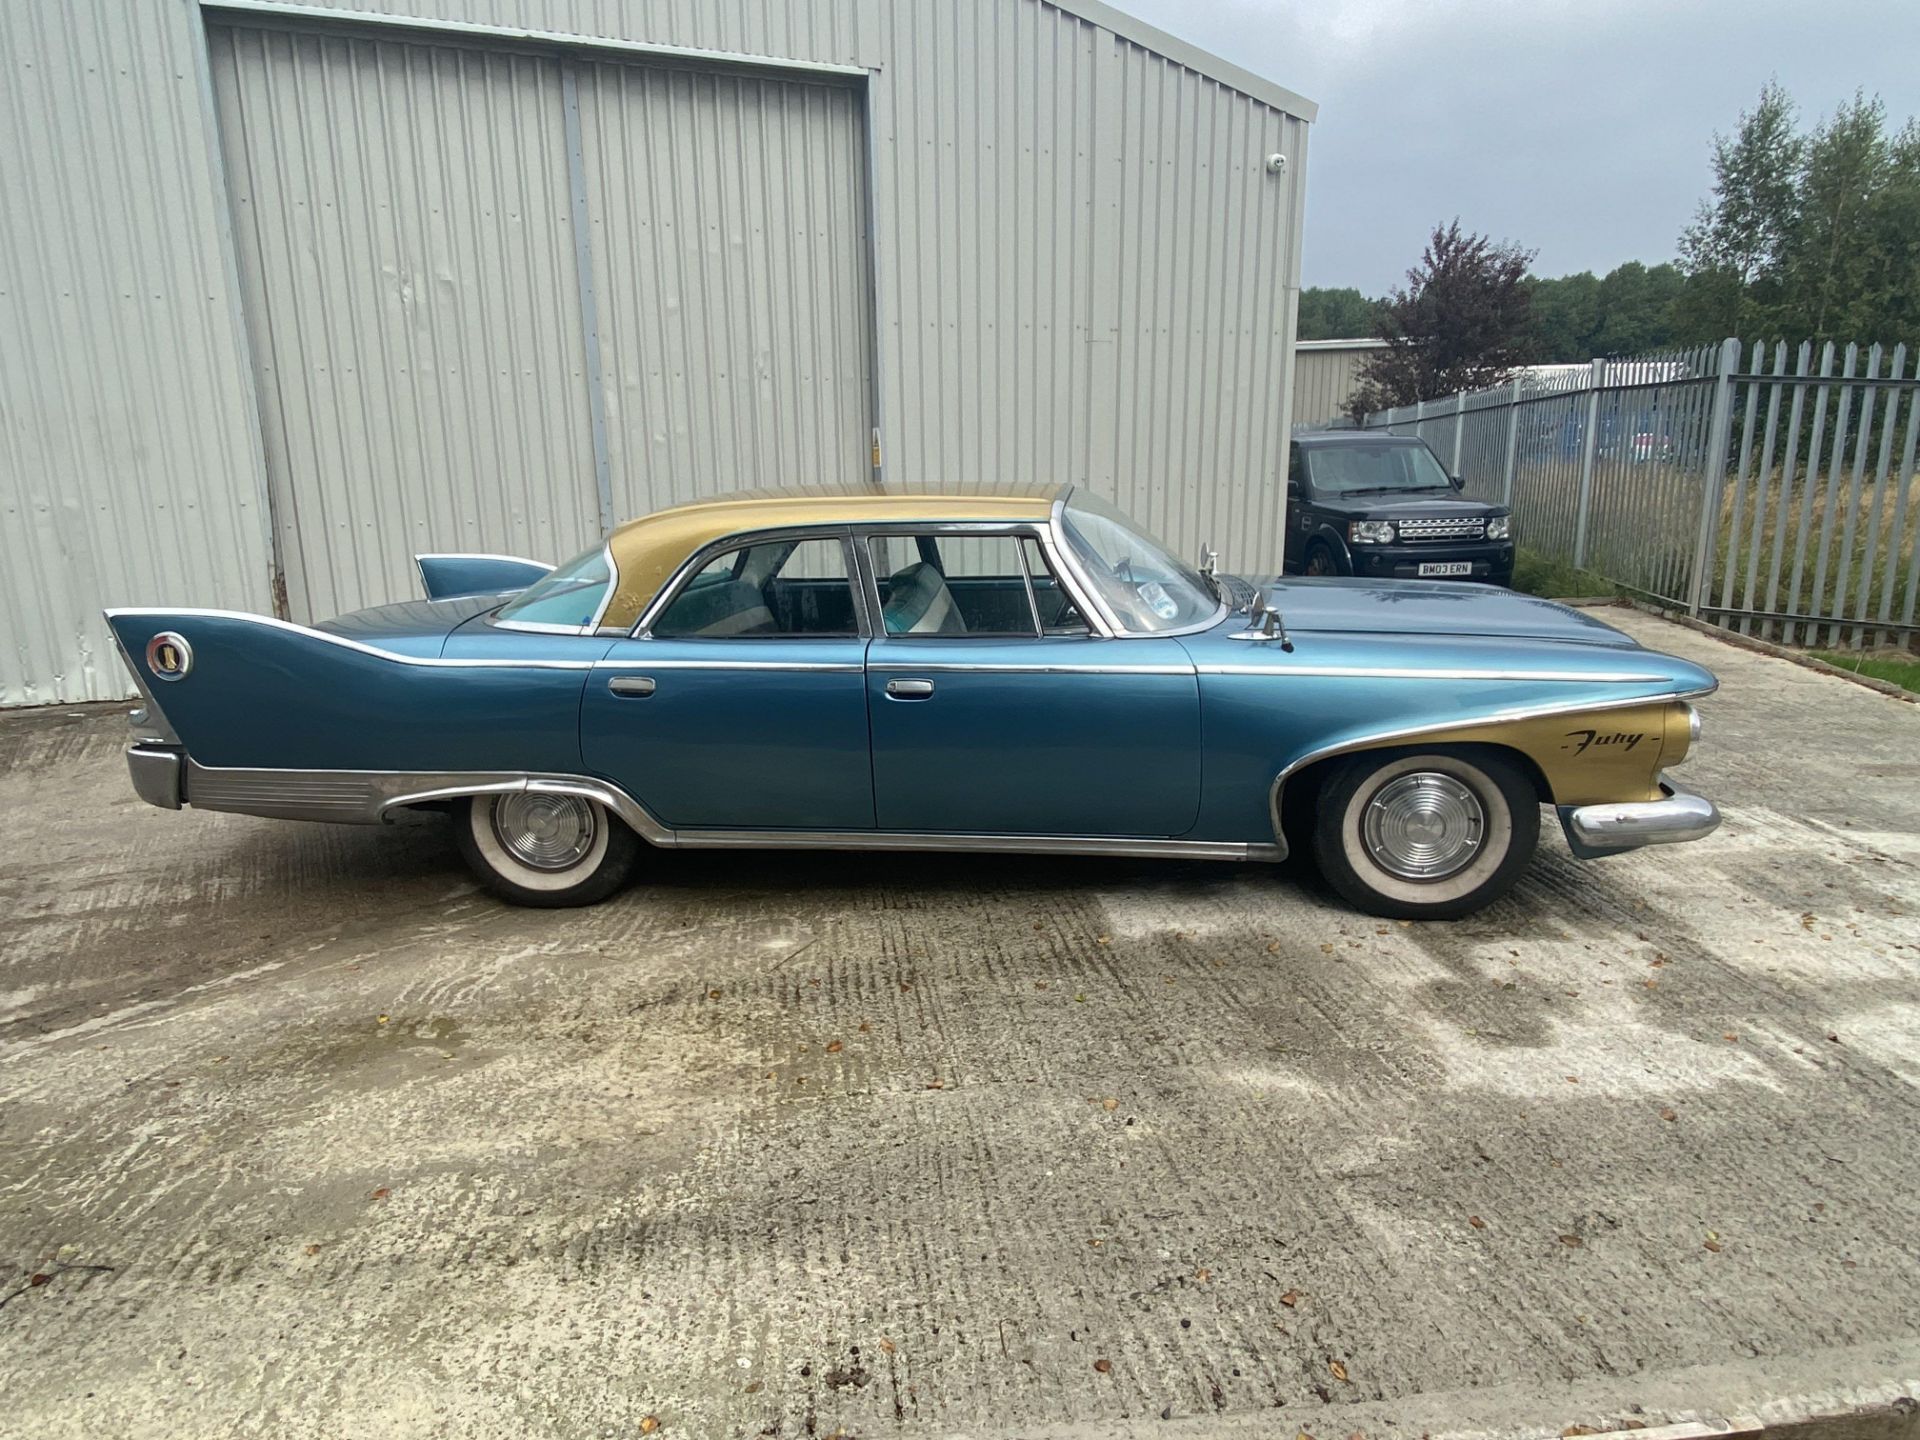 Plymouth Fury - Image 3 of 41